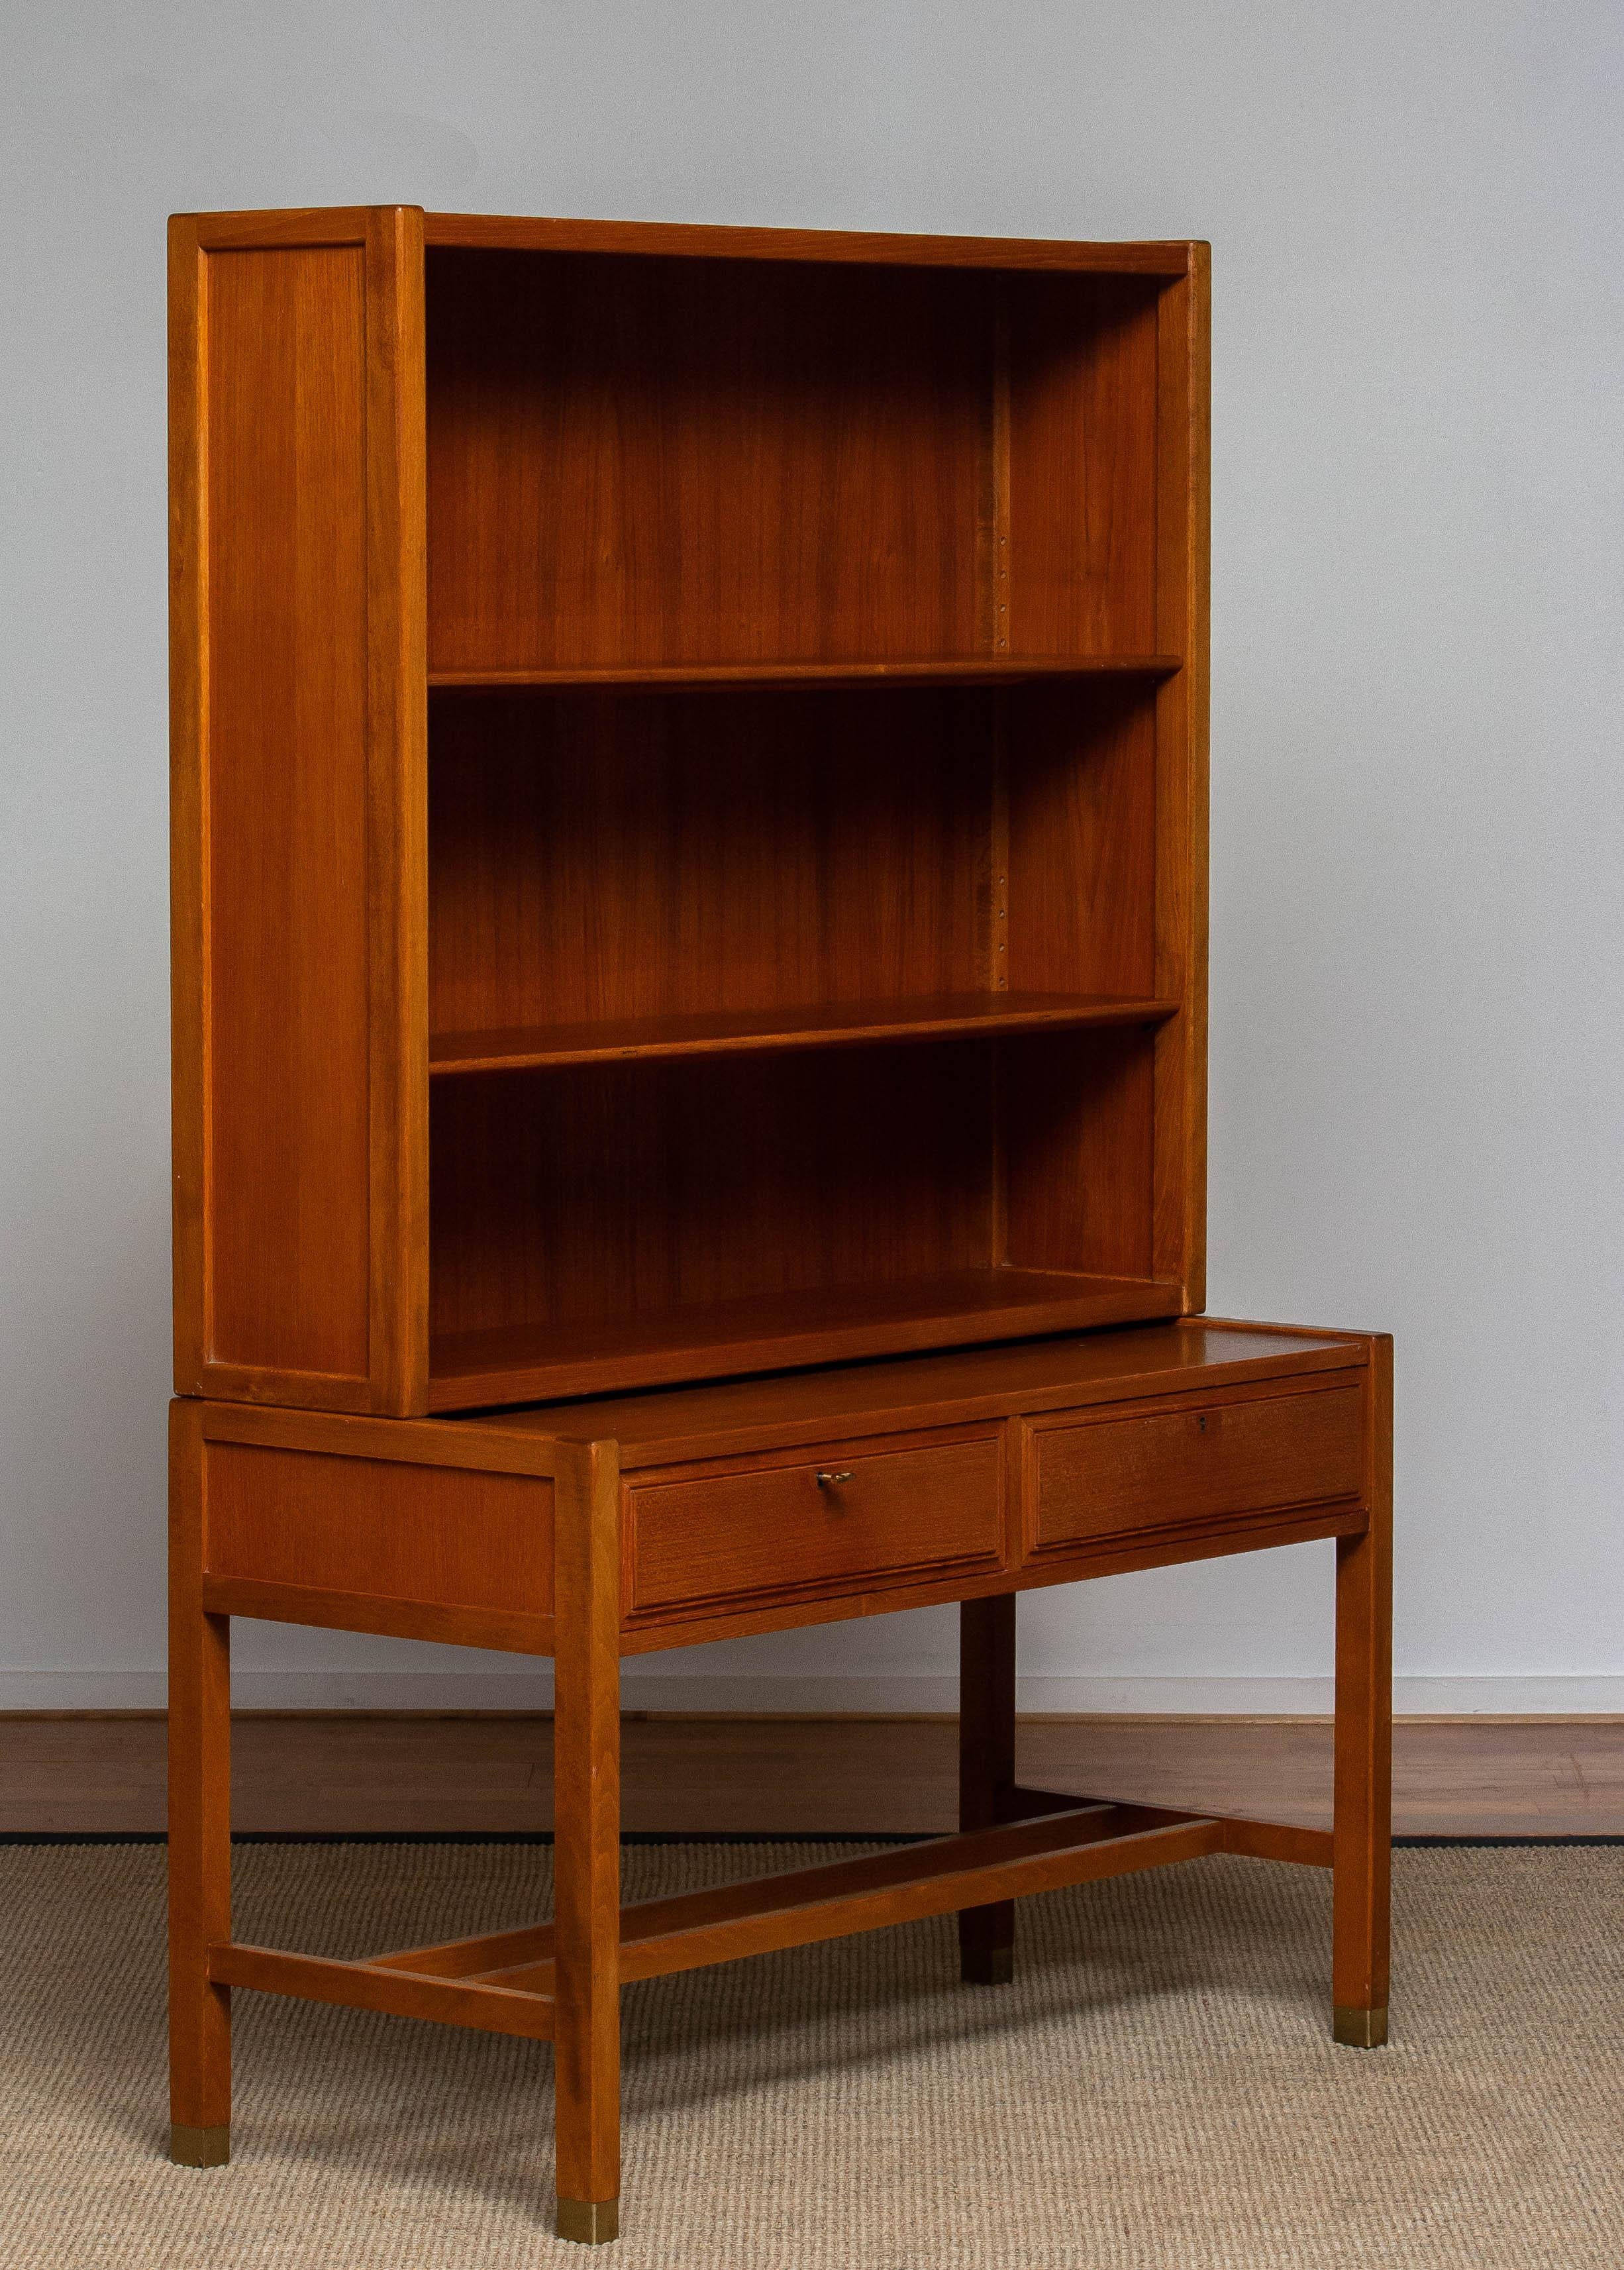 Brass 1960s Teak Drawer and Shelfs Cabinet by Carl Axel Acking for Bodafors, Sweden For Sale